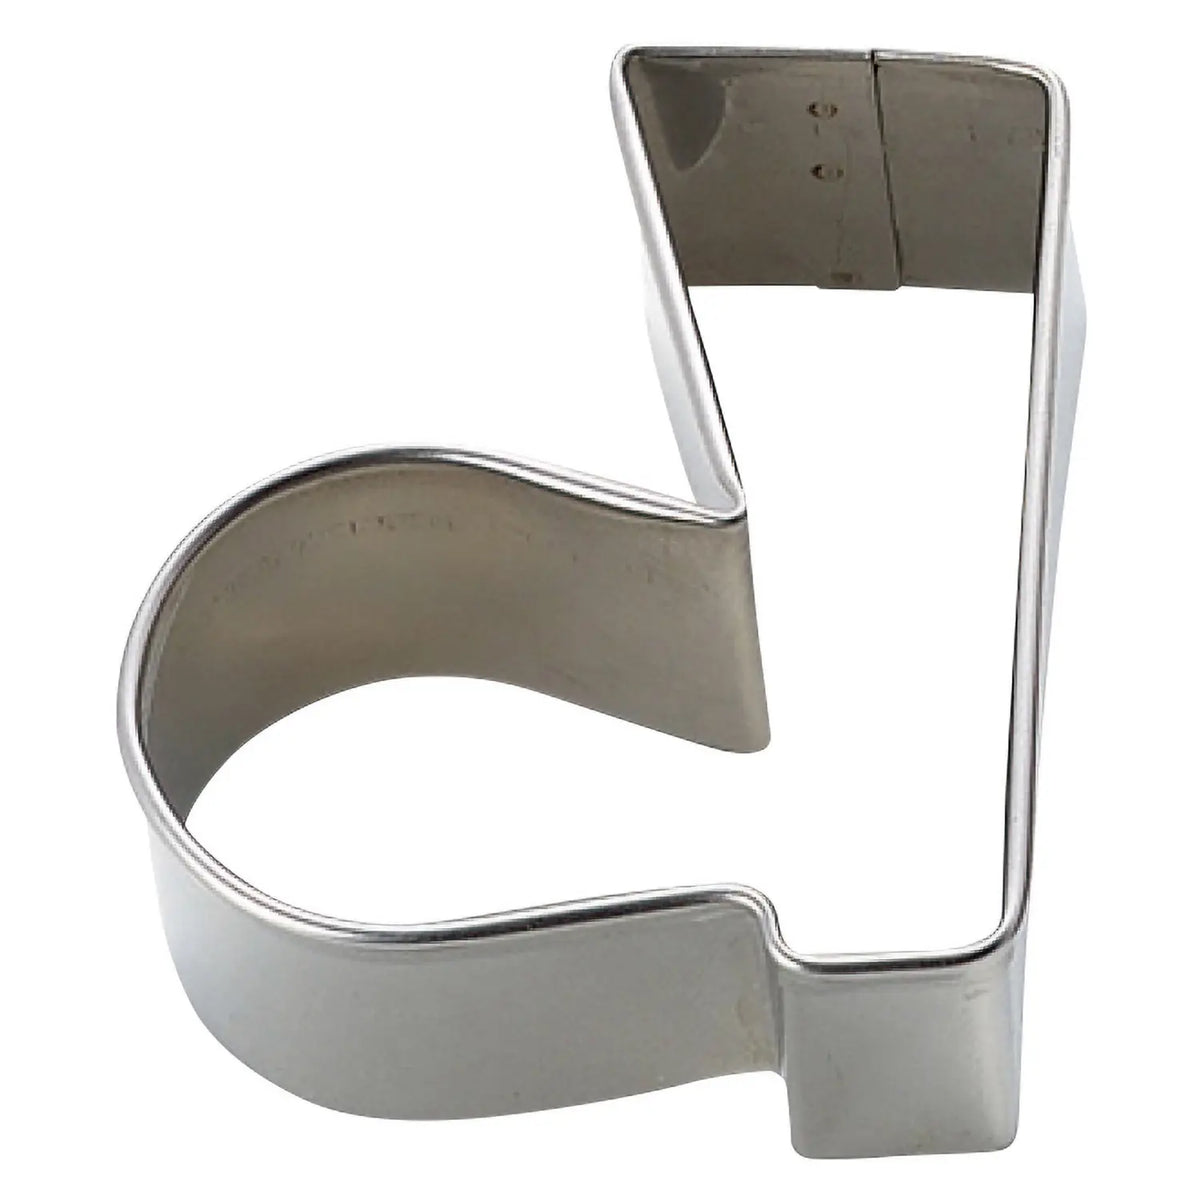 TIGERCROWN Cake Land Stainless Steel Cookie Cutter Boot